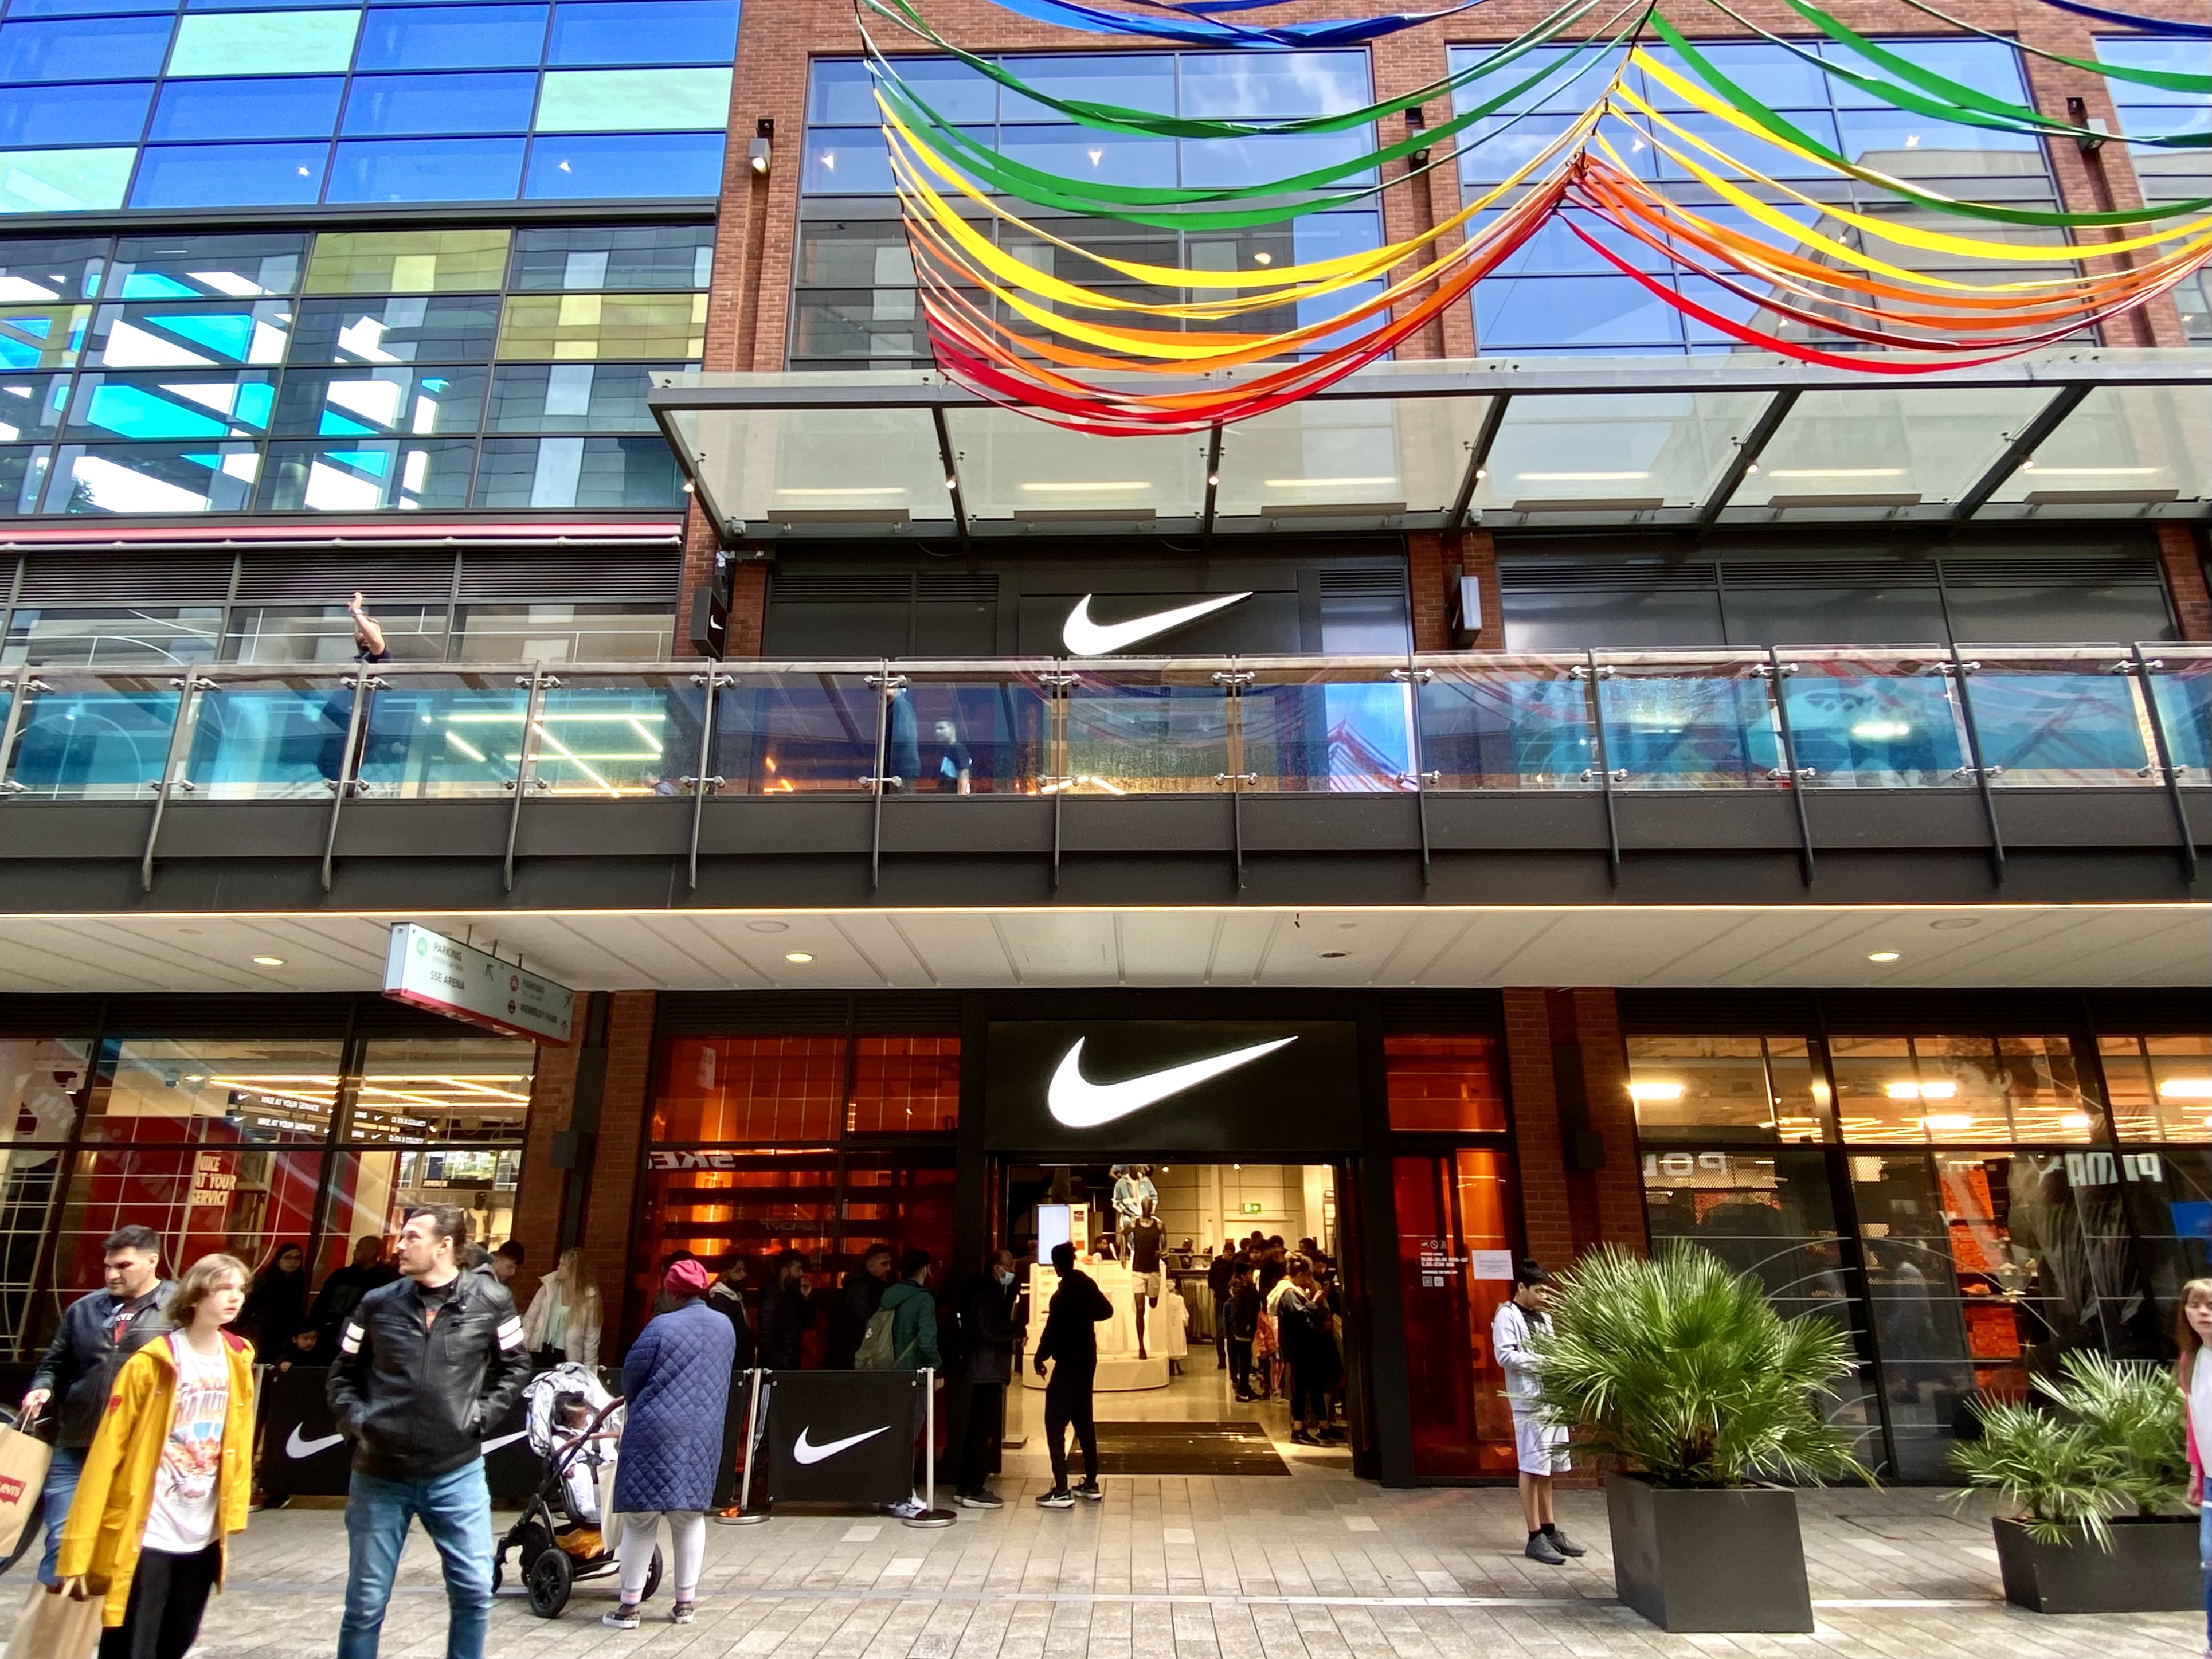 Wembley Park on Twitter: "Say hello to Unite in #WembleyPark👟 👋 across two (yes, two) floors London Designer Outlet, Nike Unite's brand-new super-sized store is all about community, unity